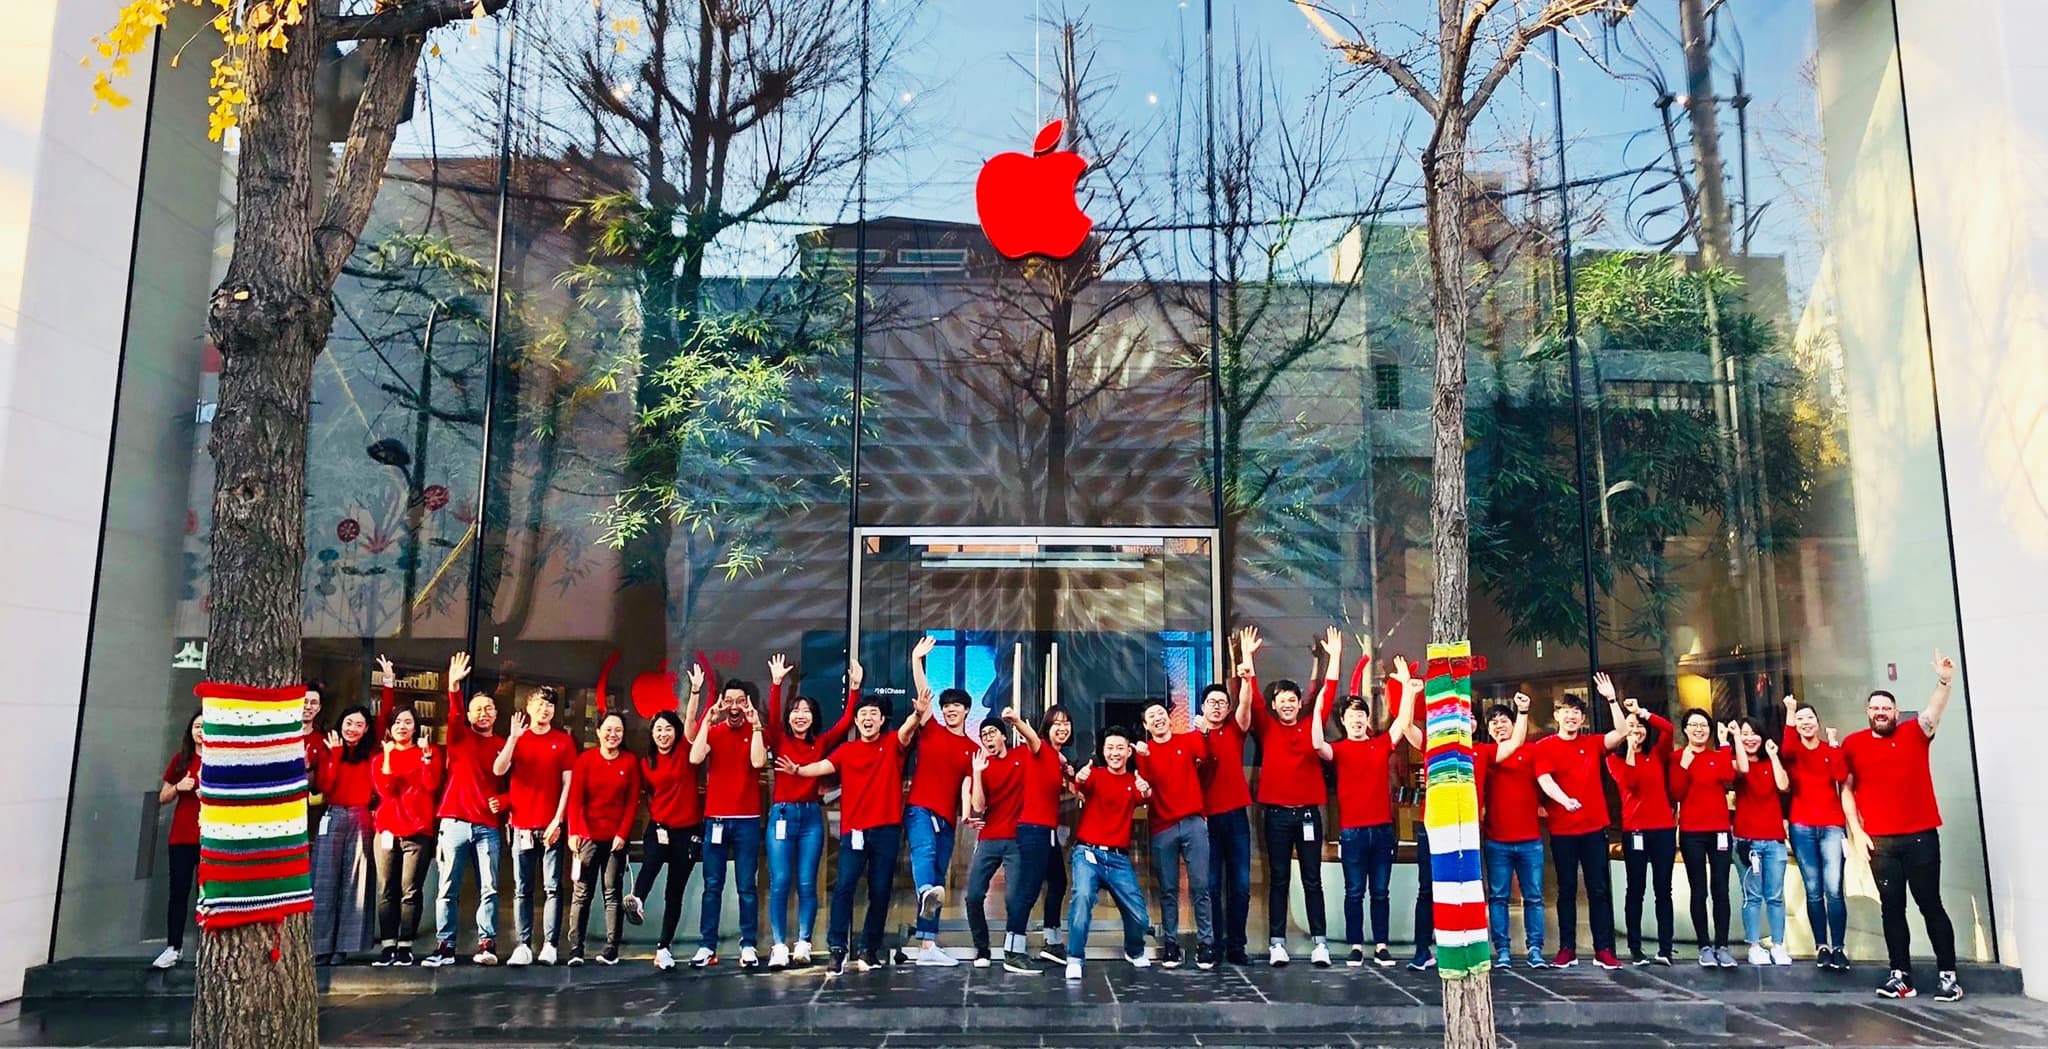 Apple calls attention to World AIDS Day with red logos in its retail stores.